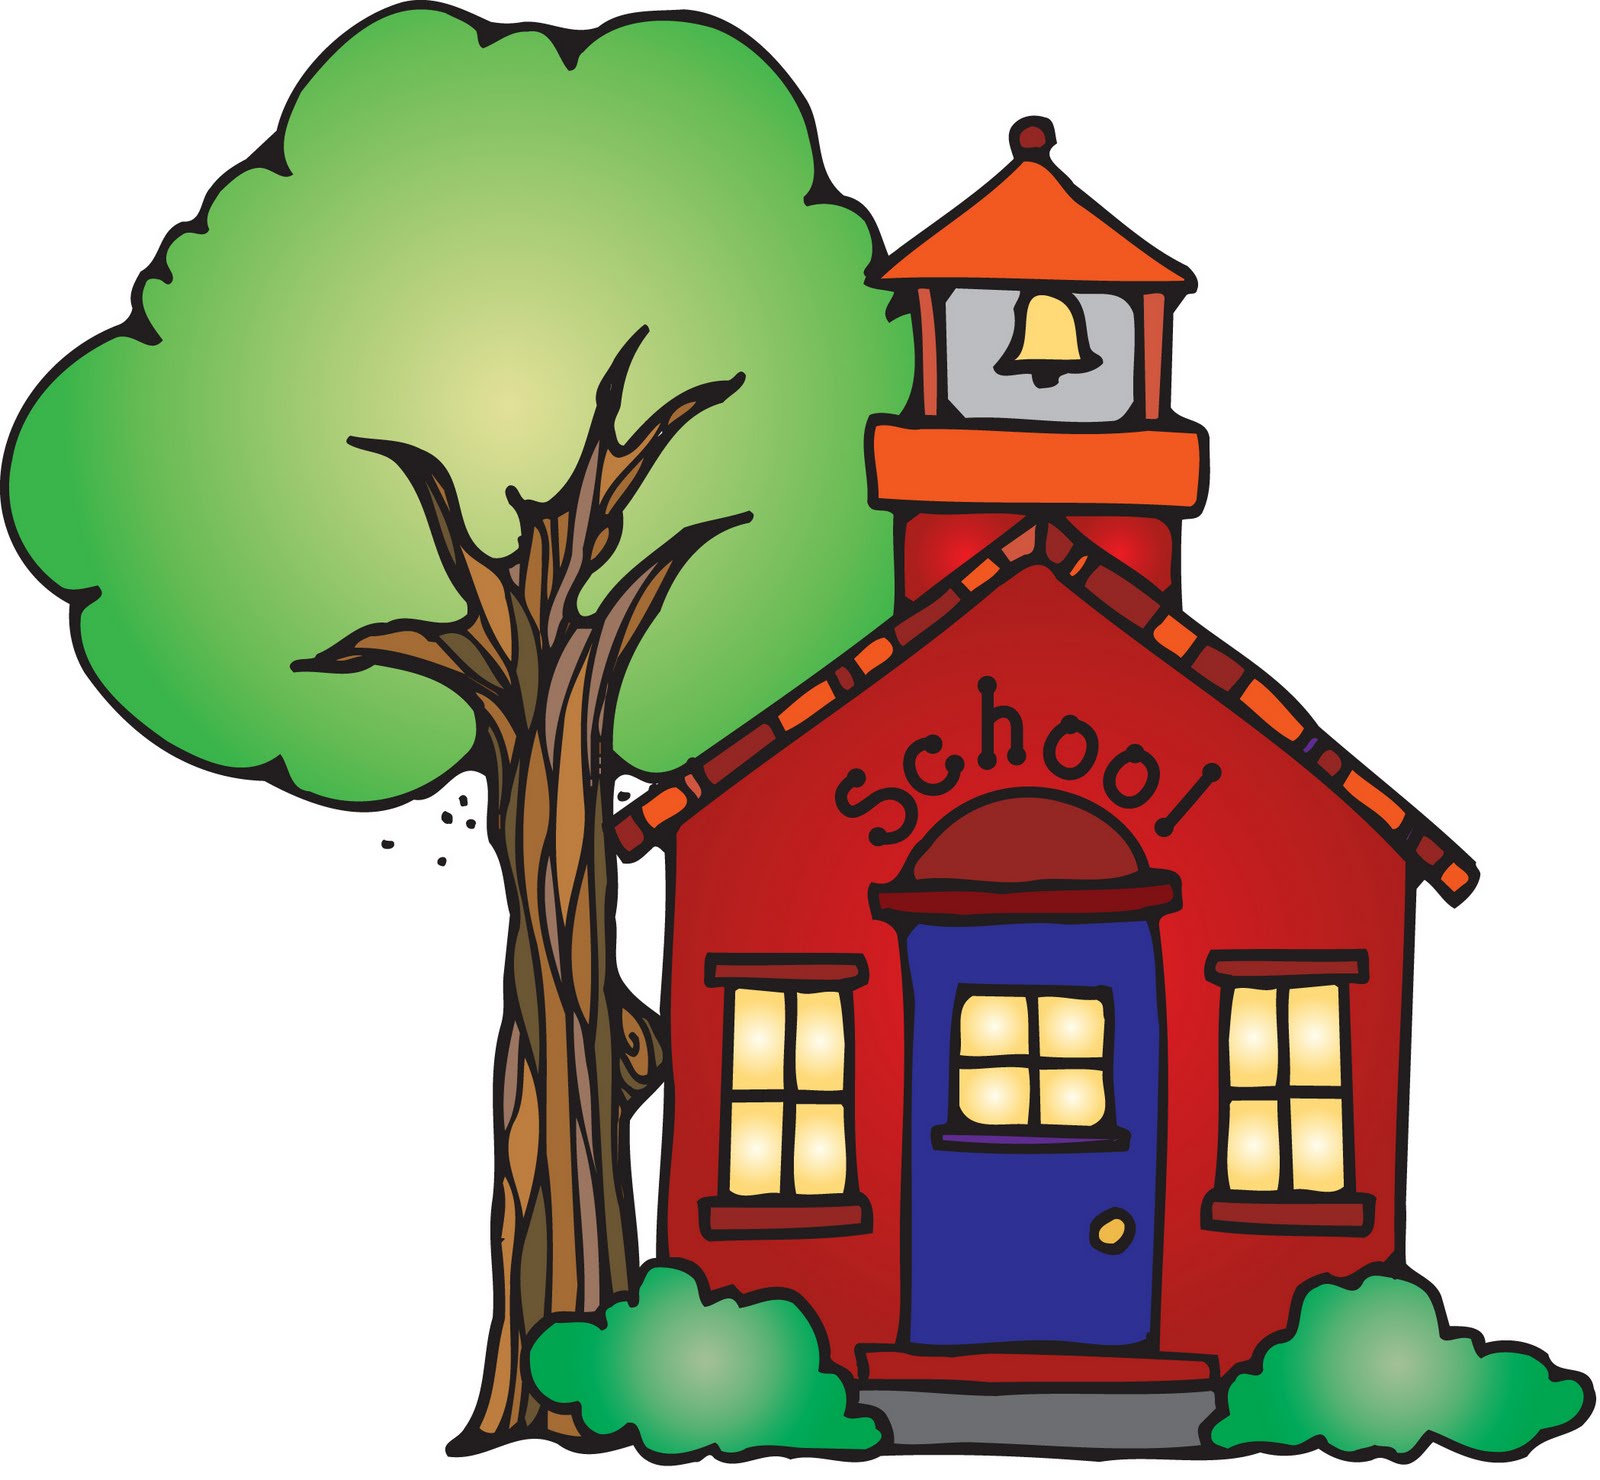 free clip art of a school house - photo #11